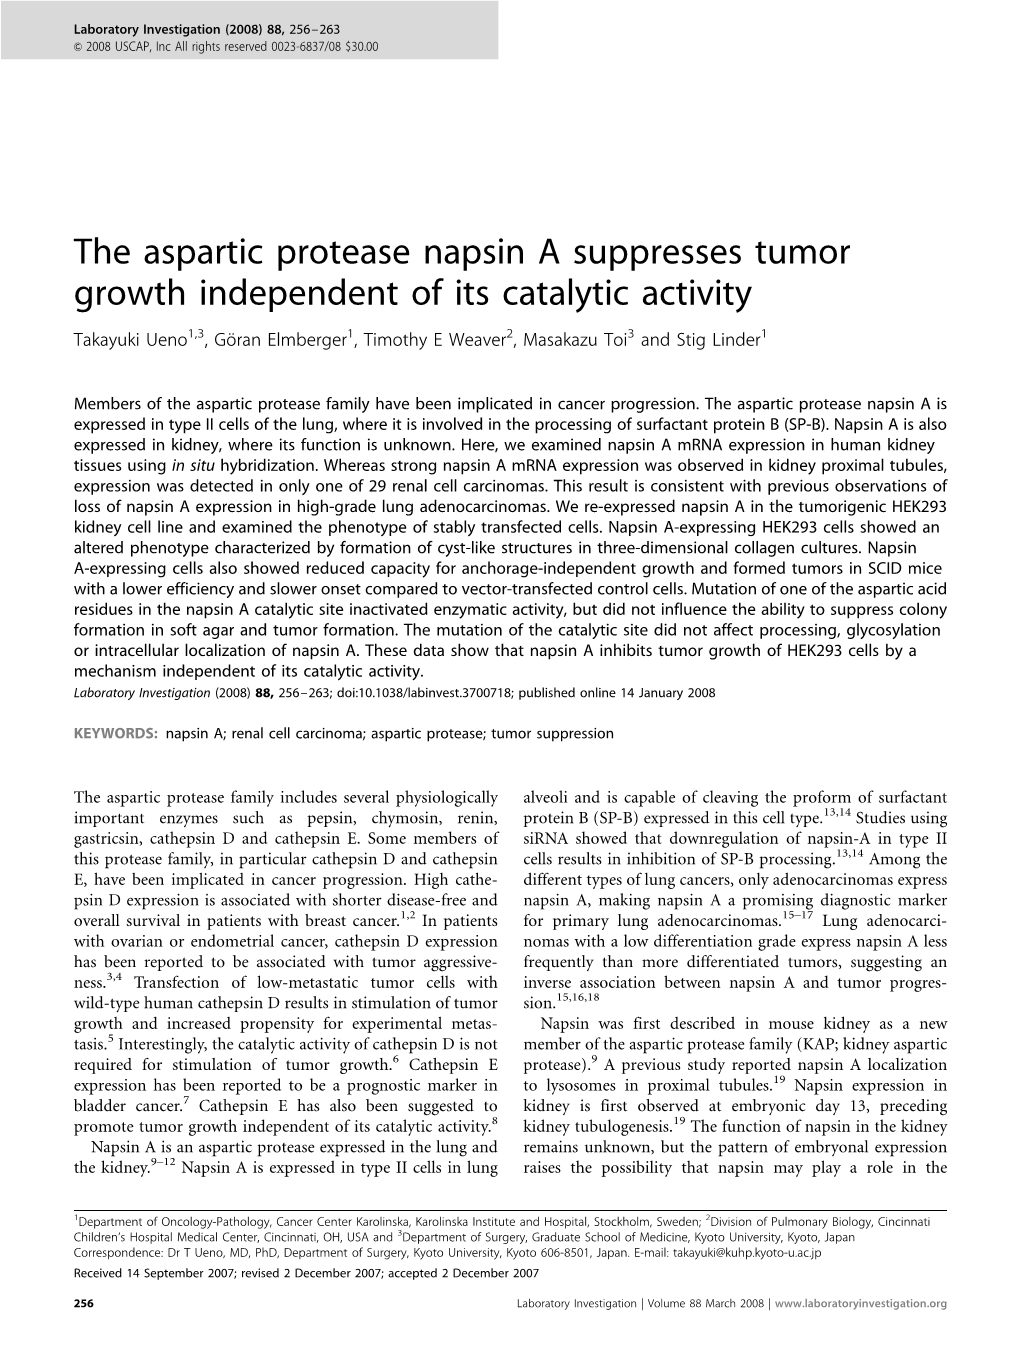 The Aspartic Protease Napsin a Suppresses Tumor Growth Independent of Its Catalytic Activity